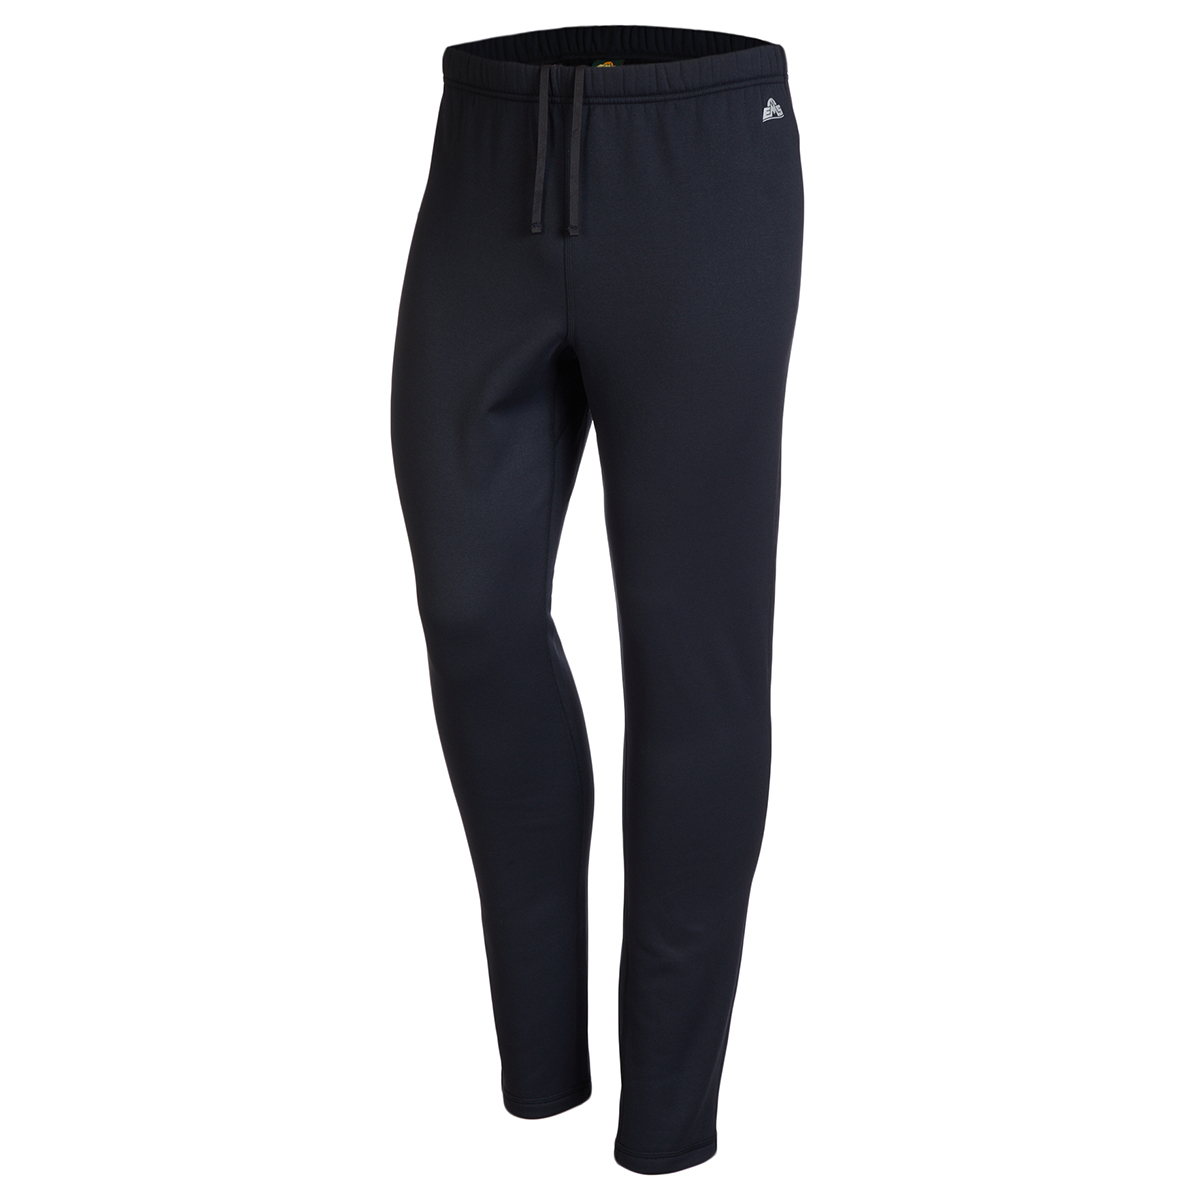 EMS Women's Equinox Stretch Ascent Tights